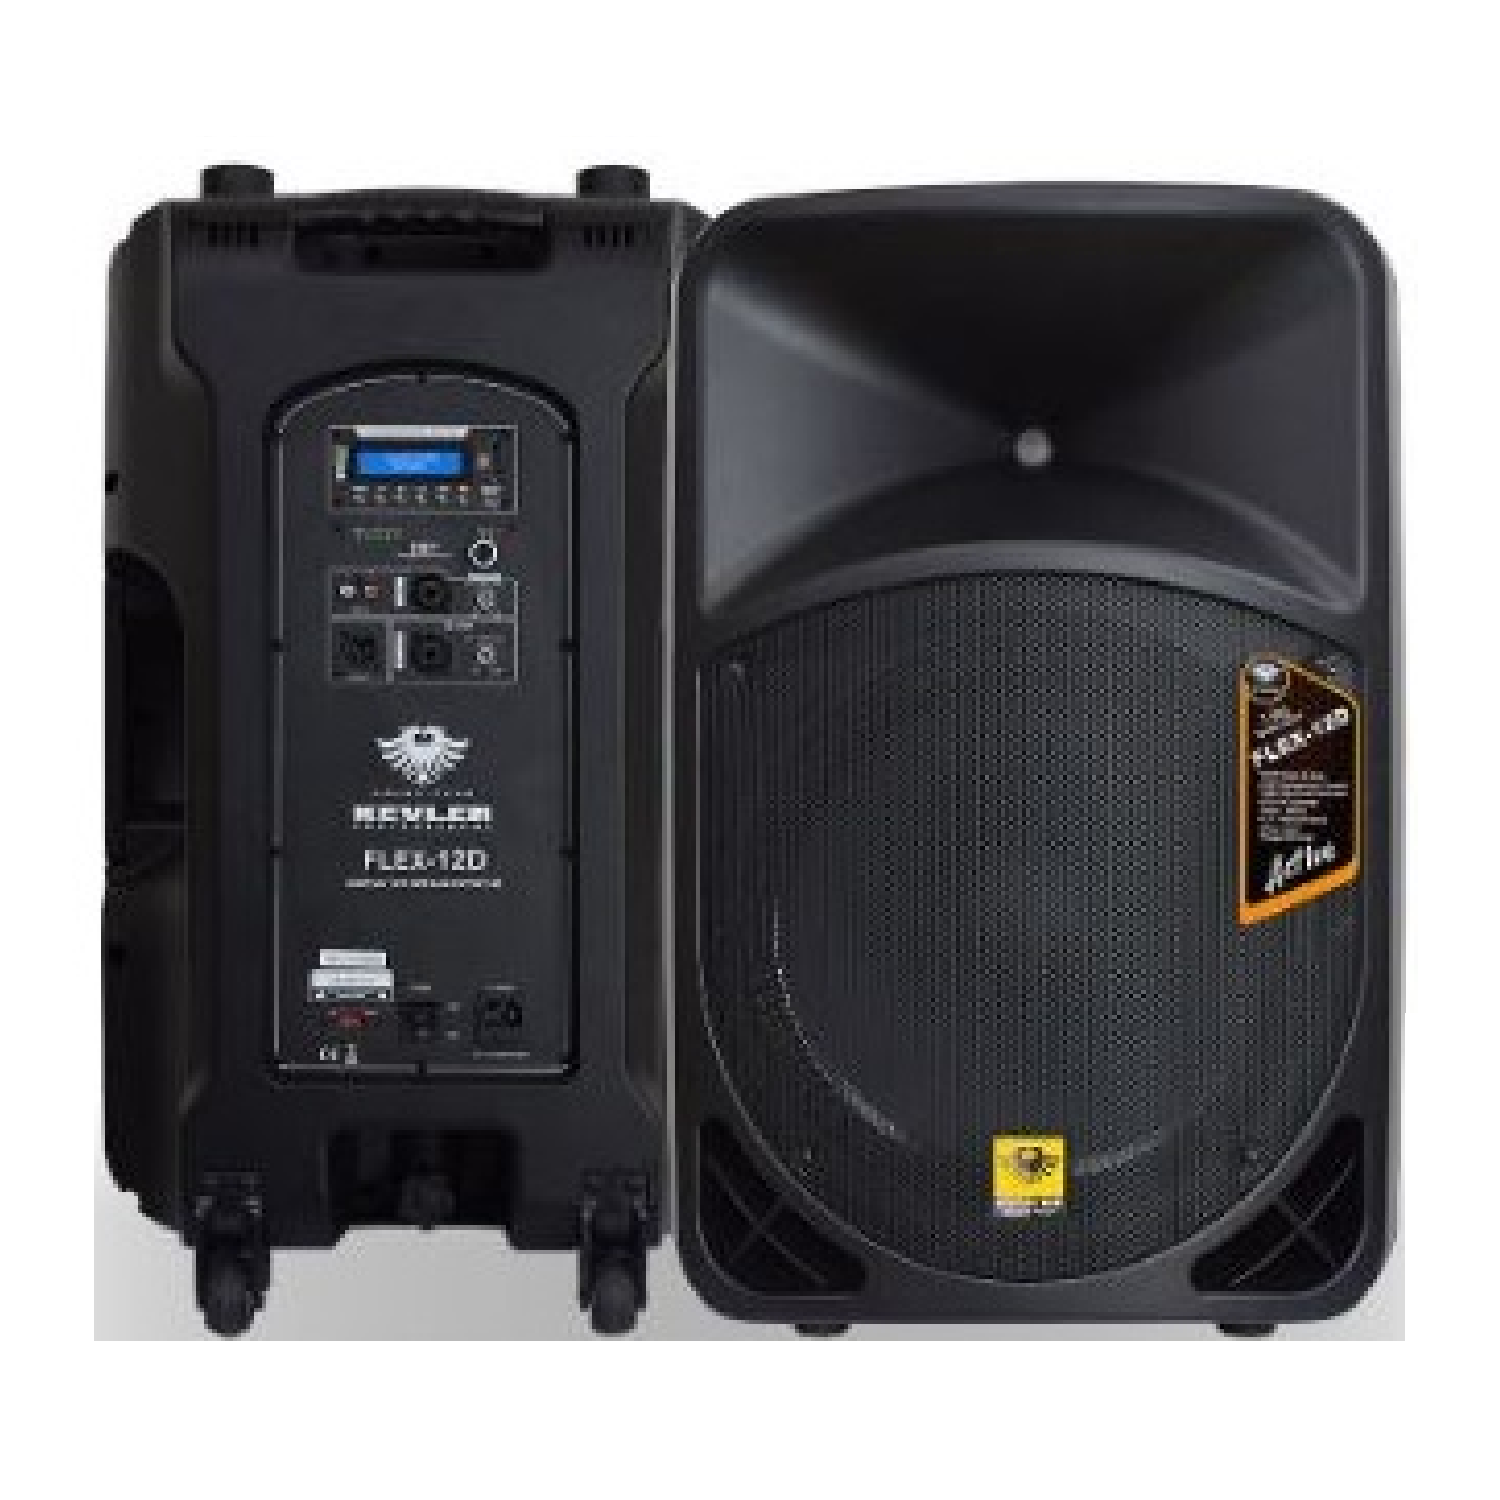 2 Way Full Range 12 Inch Woofer 1.7 Inch Tweeter Class D 500W Amp with USB and BT (Sold By Pair)   FLEX 12D kevler